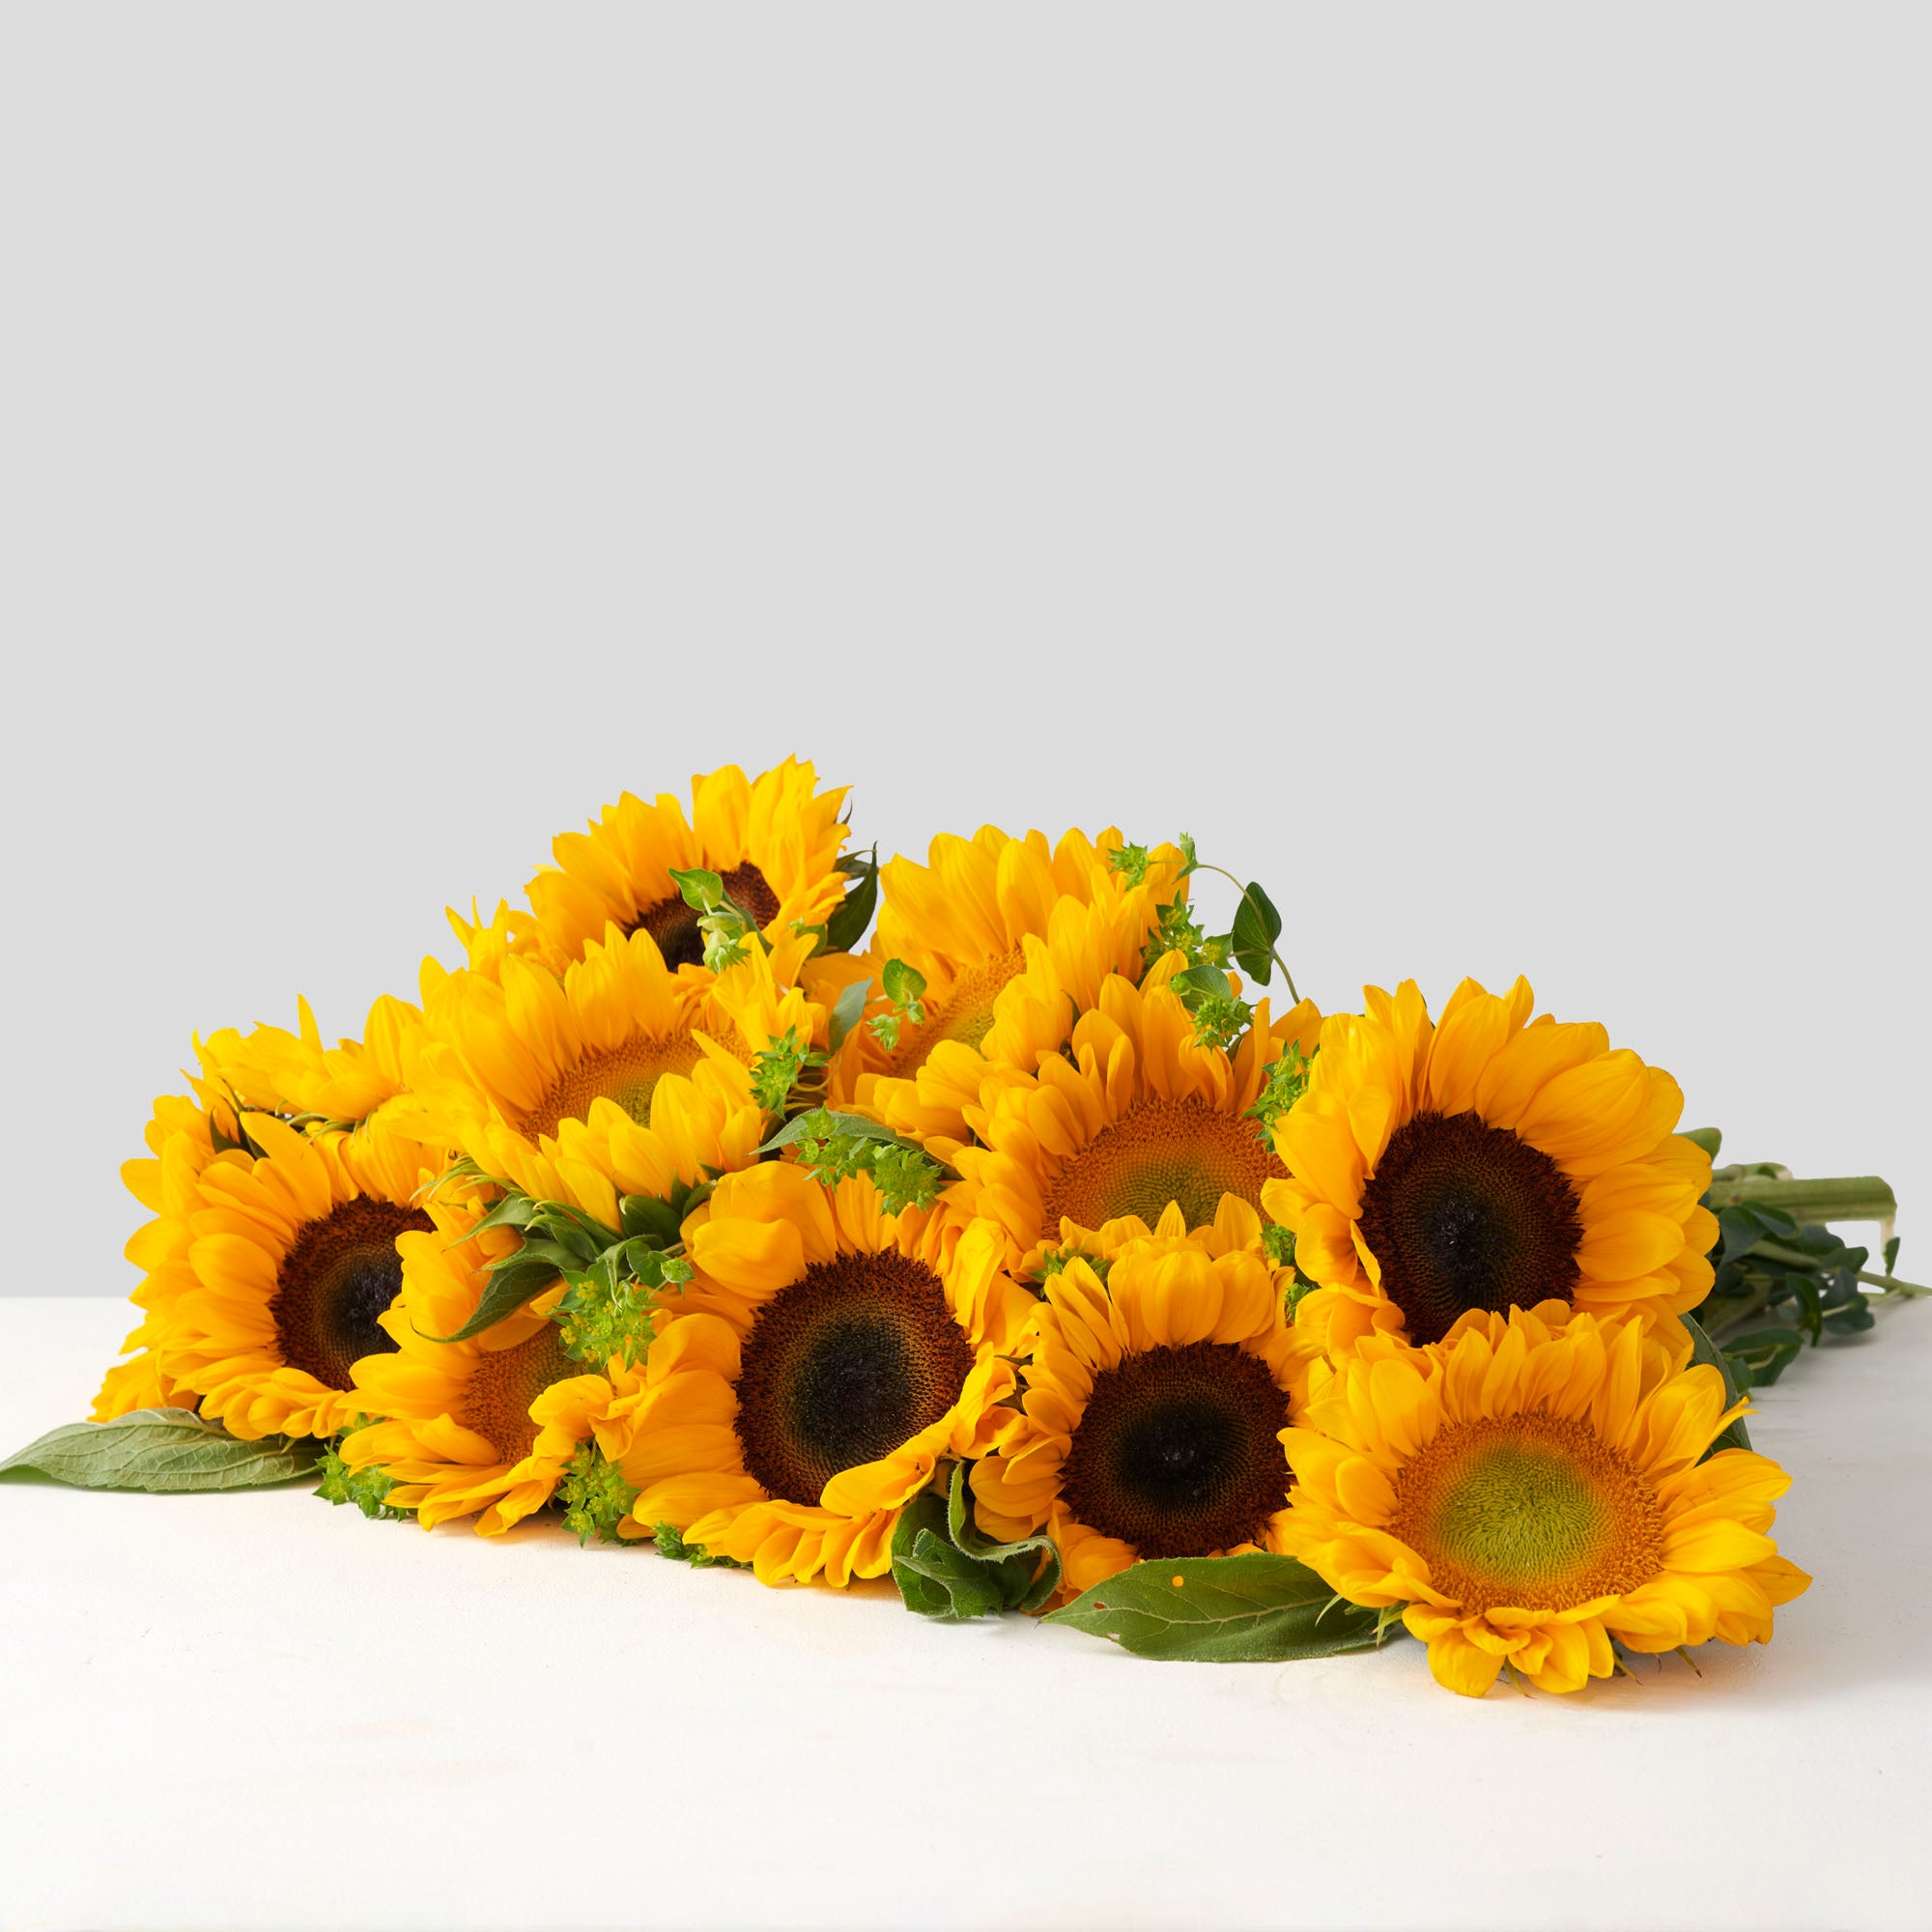 Large bouquet of sunflowers on white background.